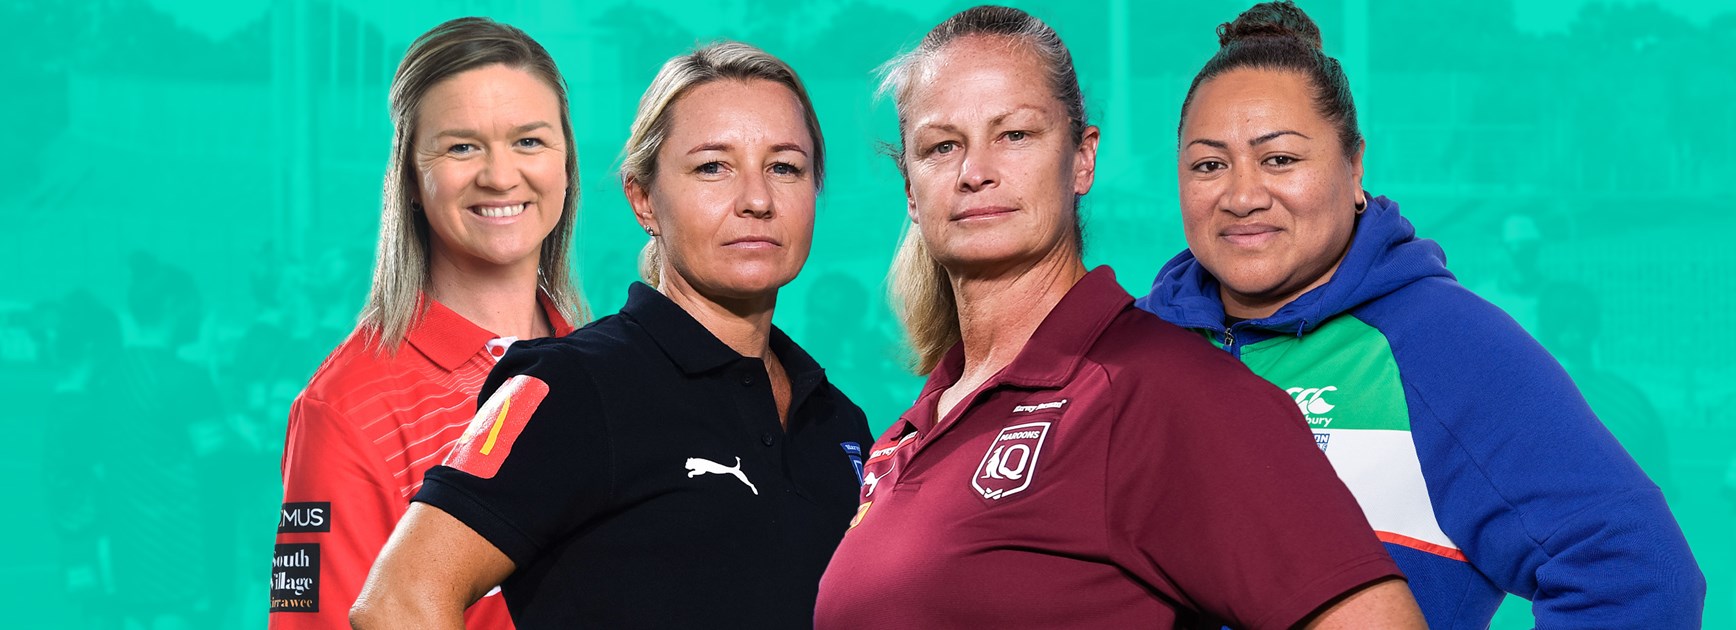 Best yet to come: Women coaches to benefit from mentoring program